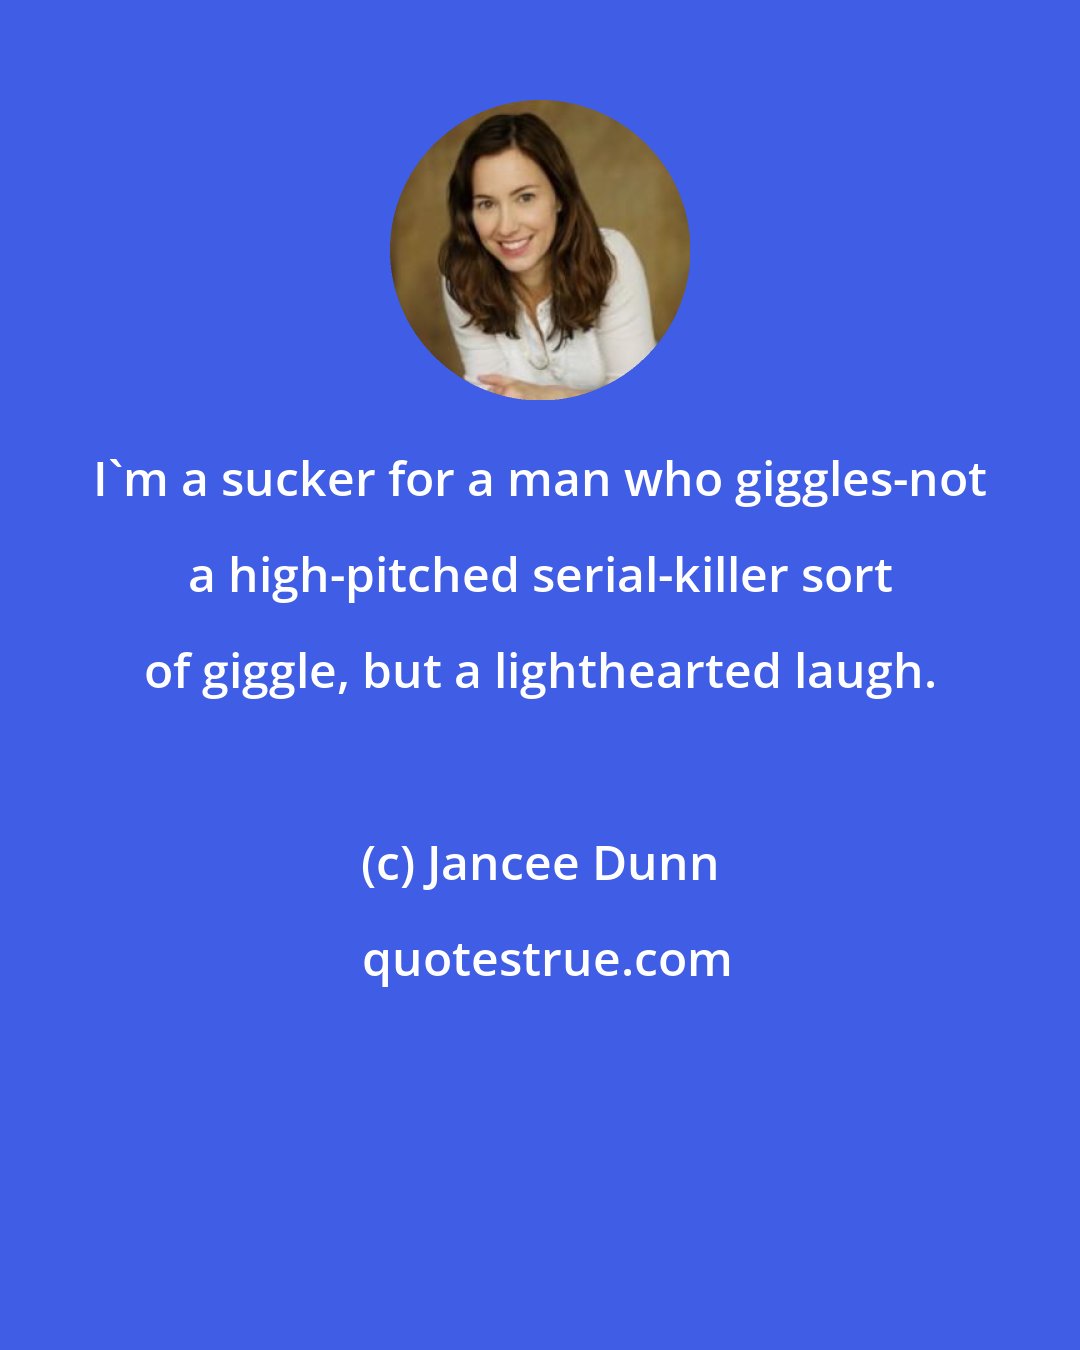 Jancee Dunn: I'm a sucker for a man who giggles-not a high-pitched serial-killer sort of giggle, but a lighthearted laugh.